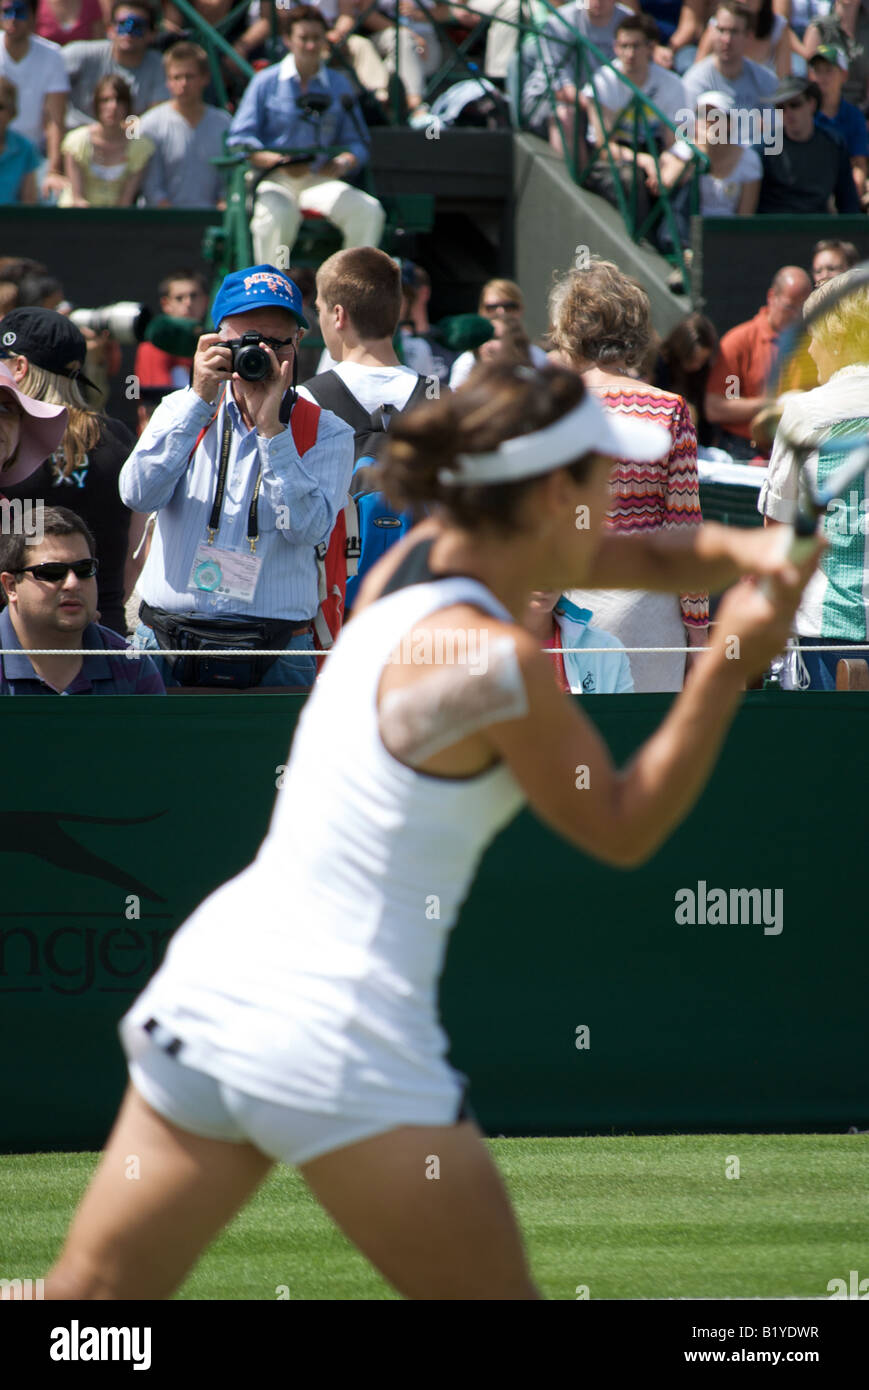 A photographer takes a picture as Nuria Llagostera Vives returns a shot during the opening day of Wimbledon 2008 Stock Photo